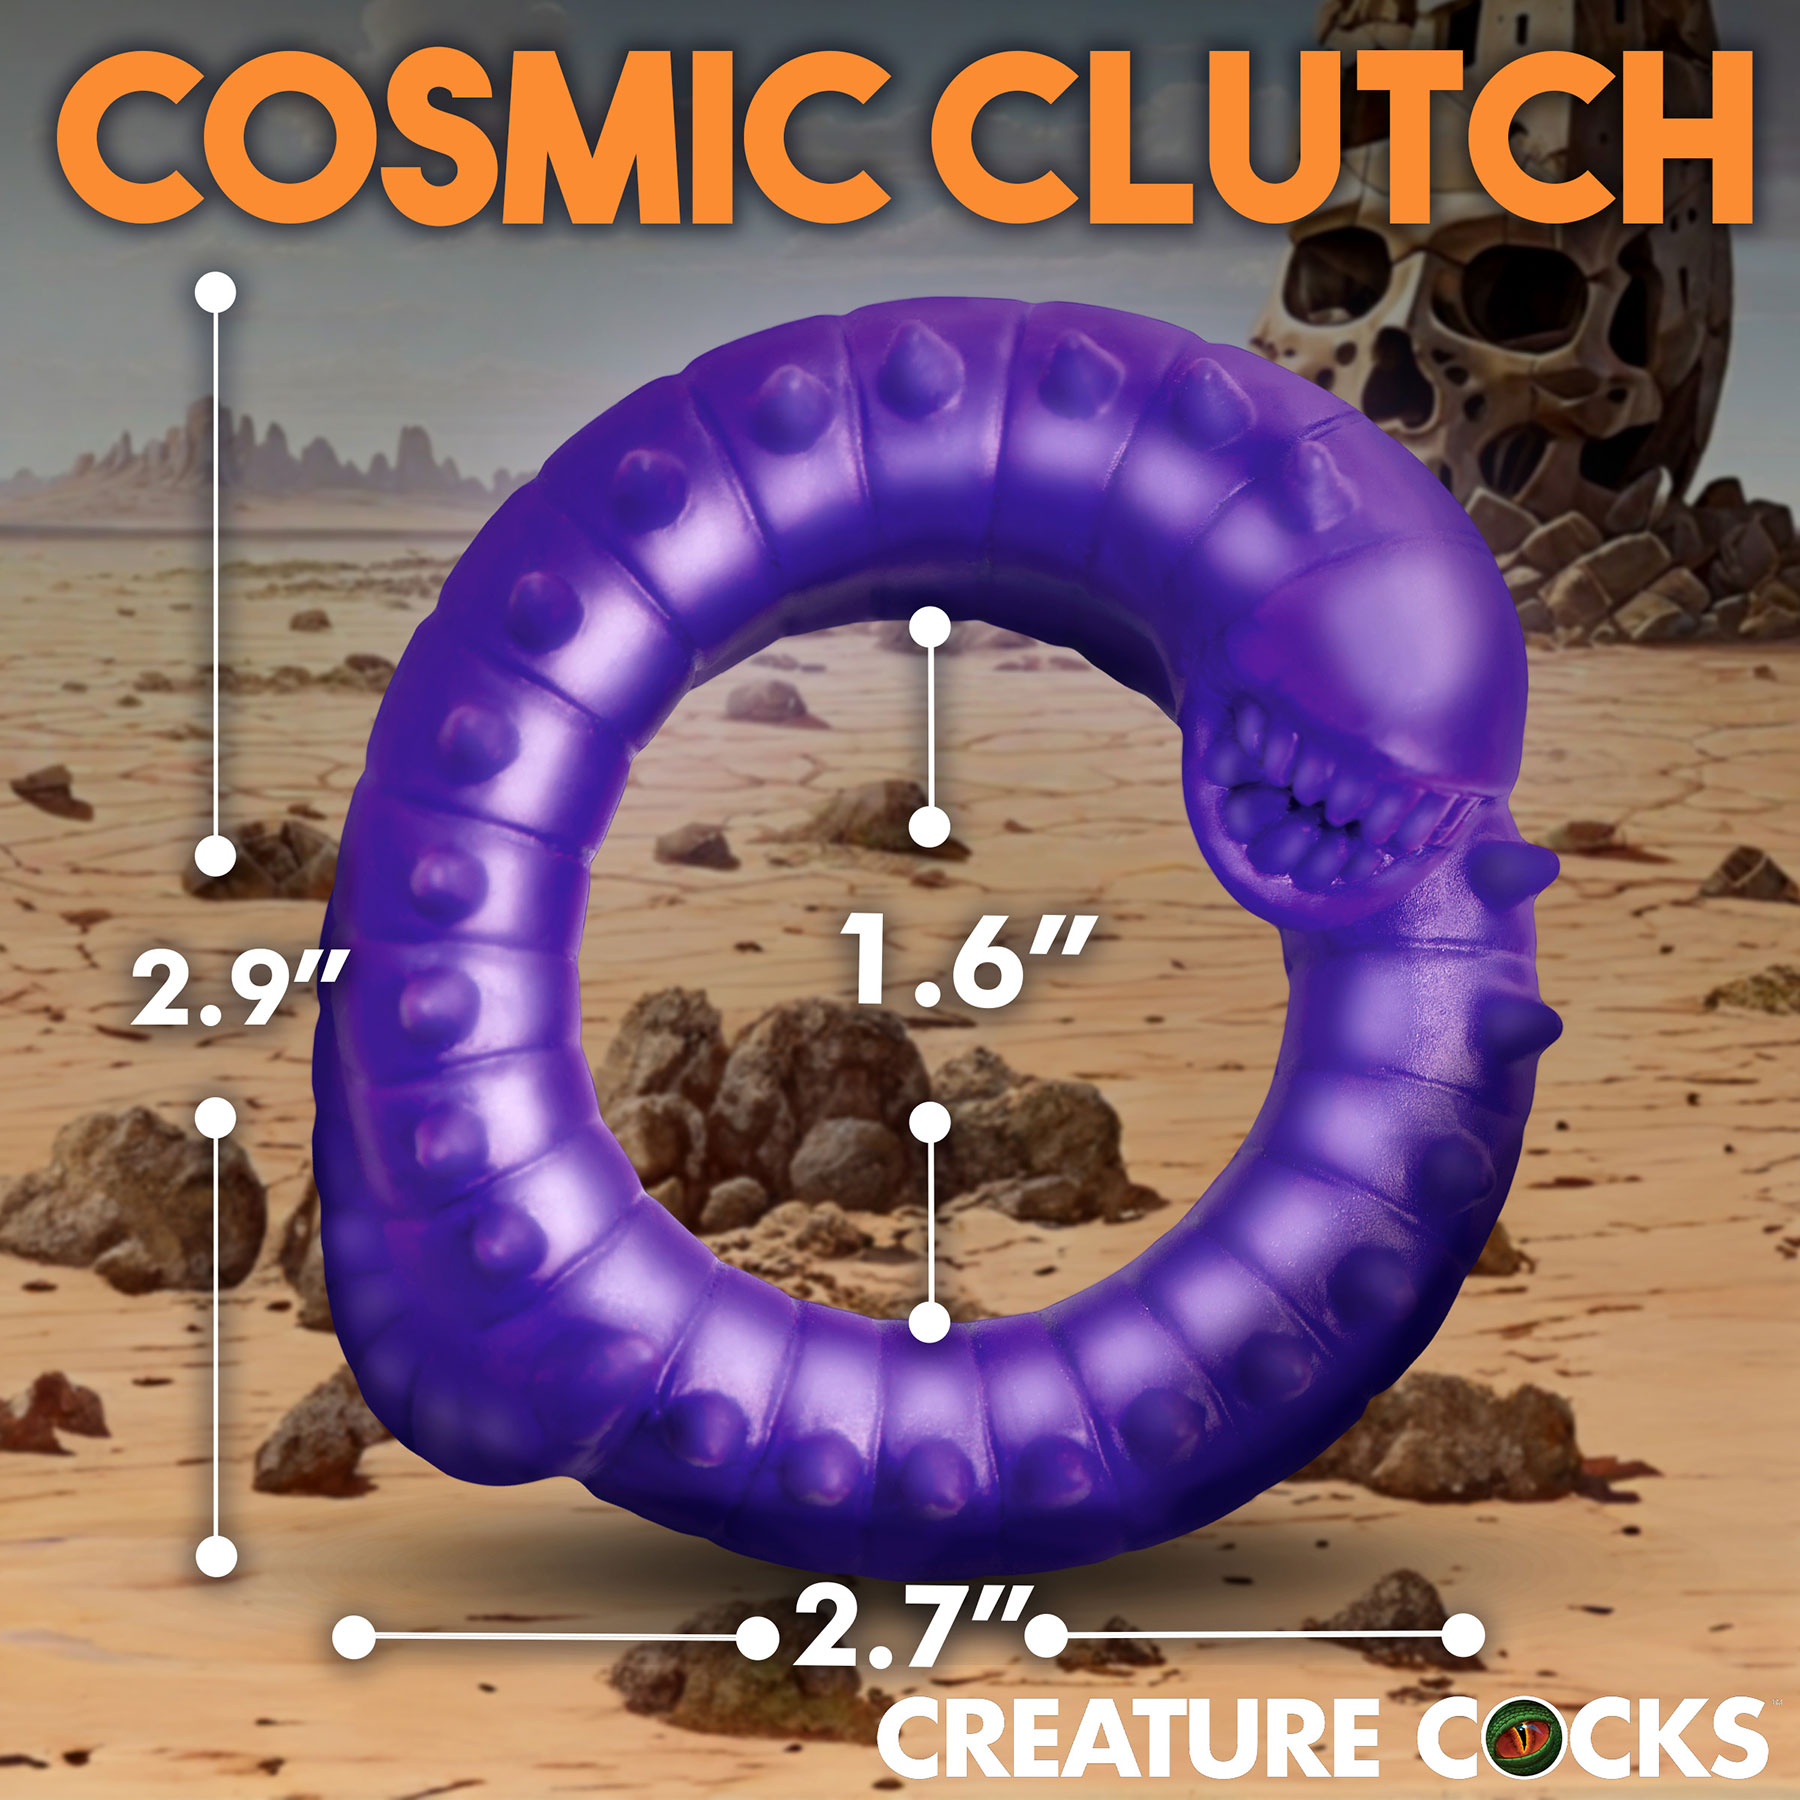 Slitherine Silicone Cock Ring - Measurements